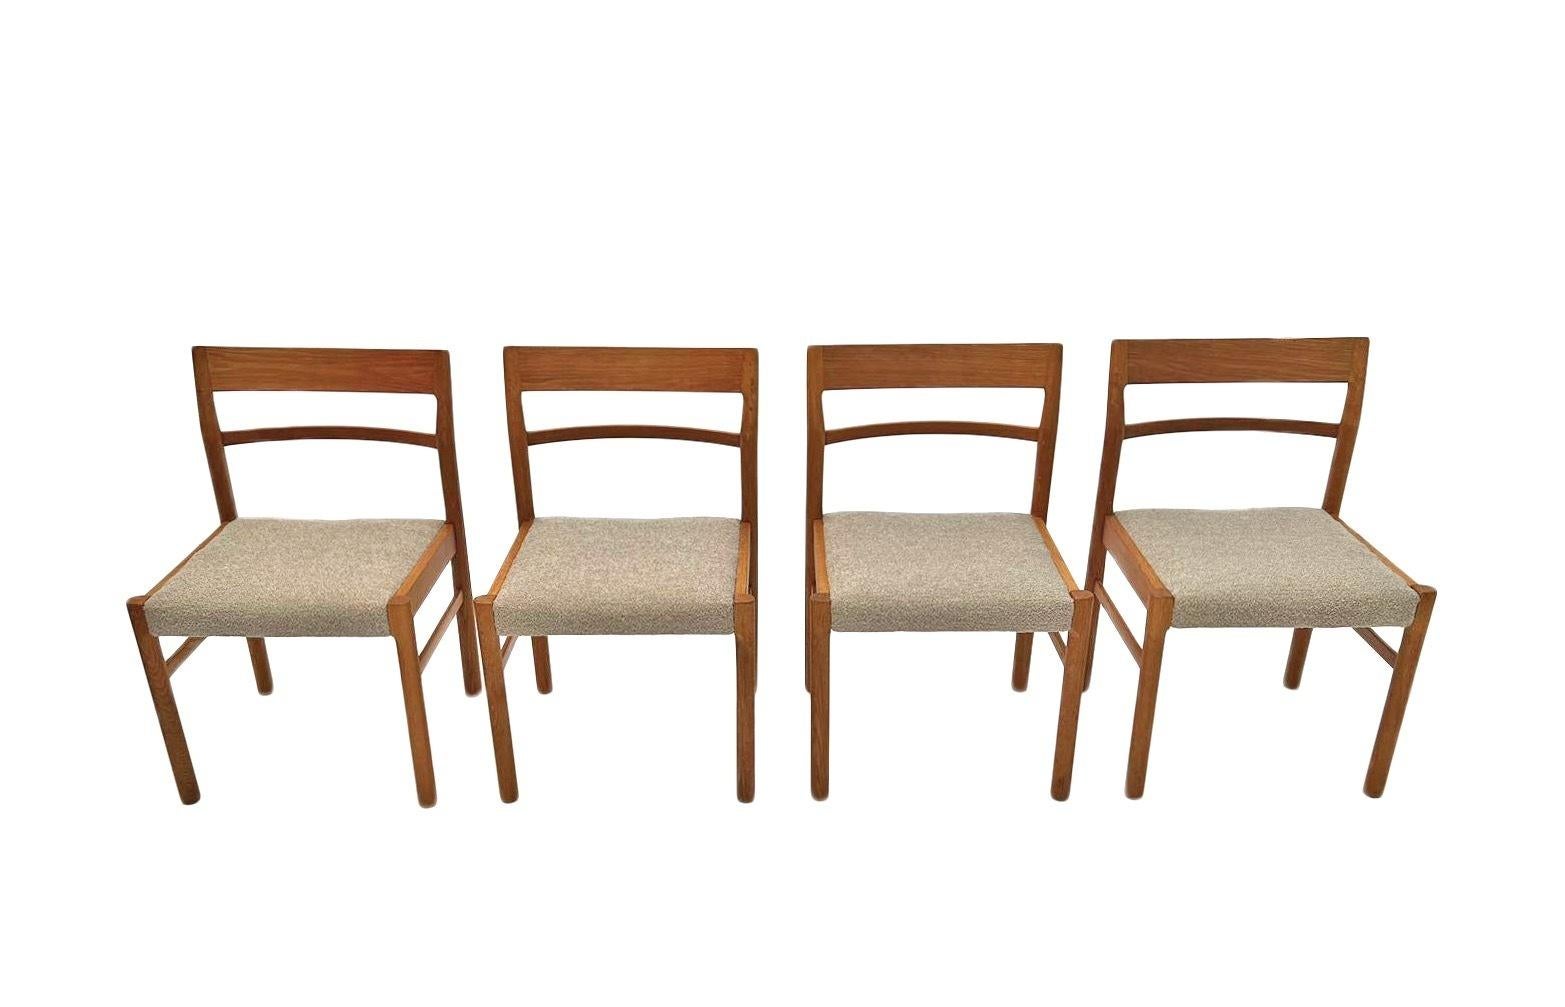 A beautiful set of 4 oak and cream boucle wool dining chairs, these would make a stylish addition to any dining area.

The chairs have wide seat pads and sculptured timber backrests for enhanced comfort. A striking piece of classically designed